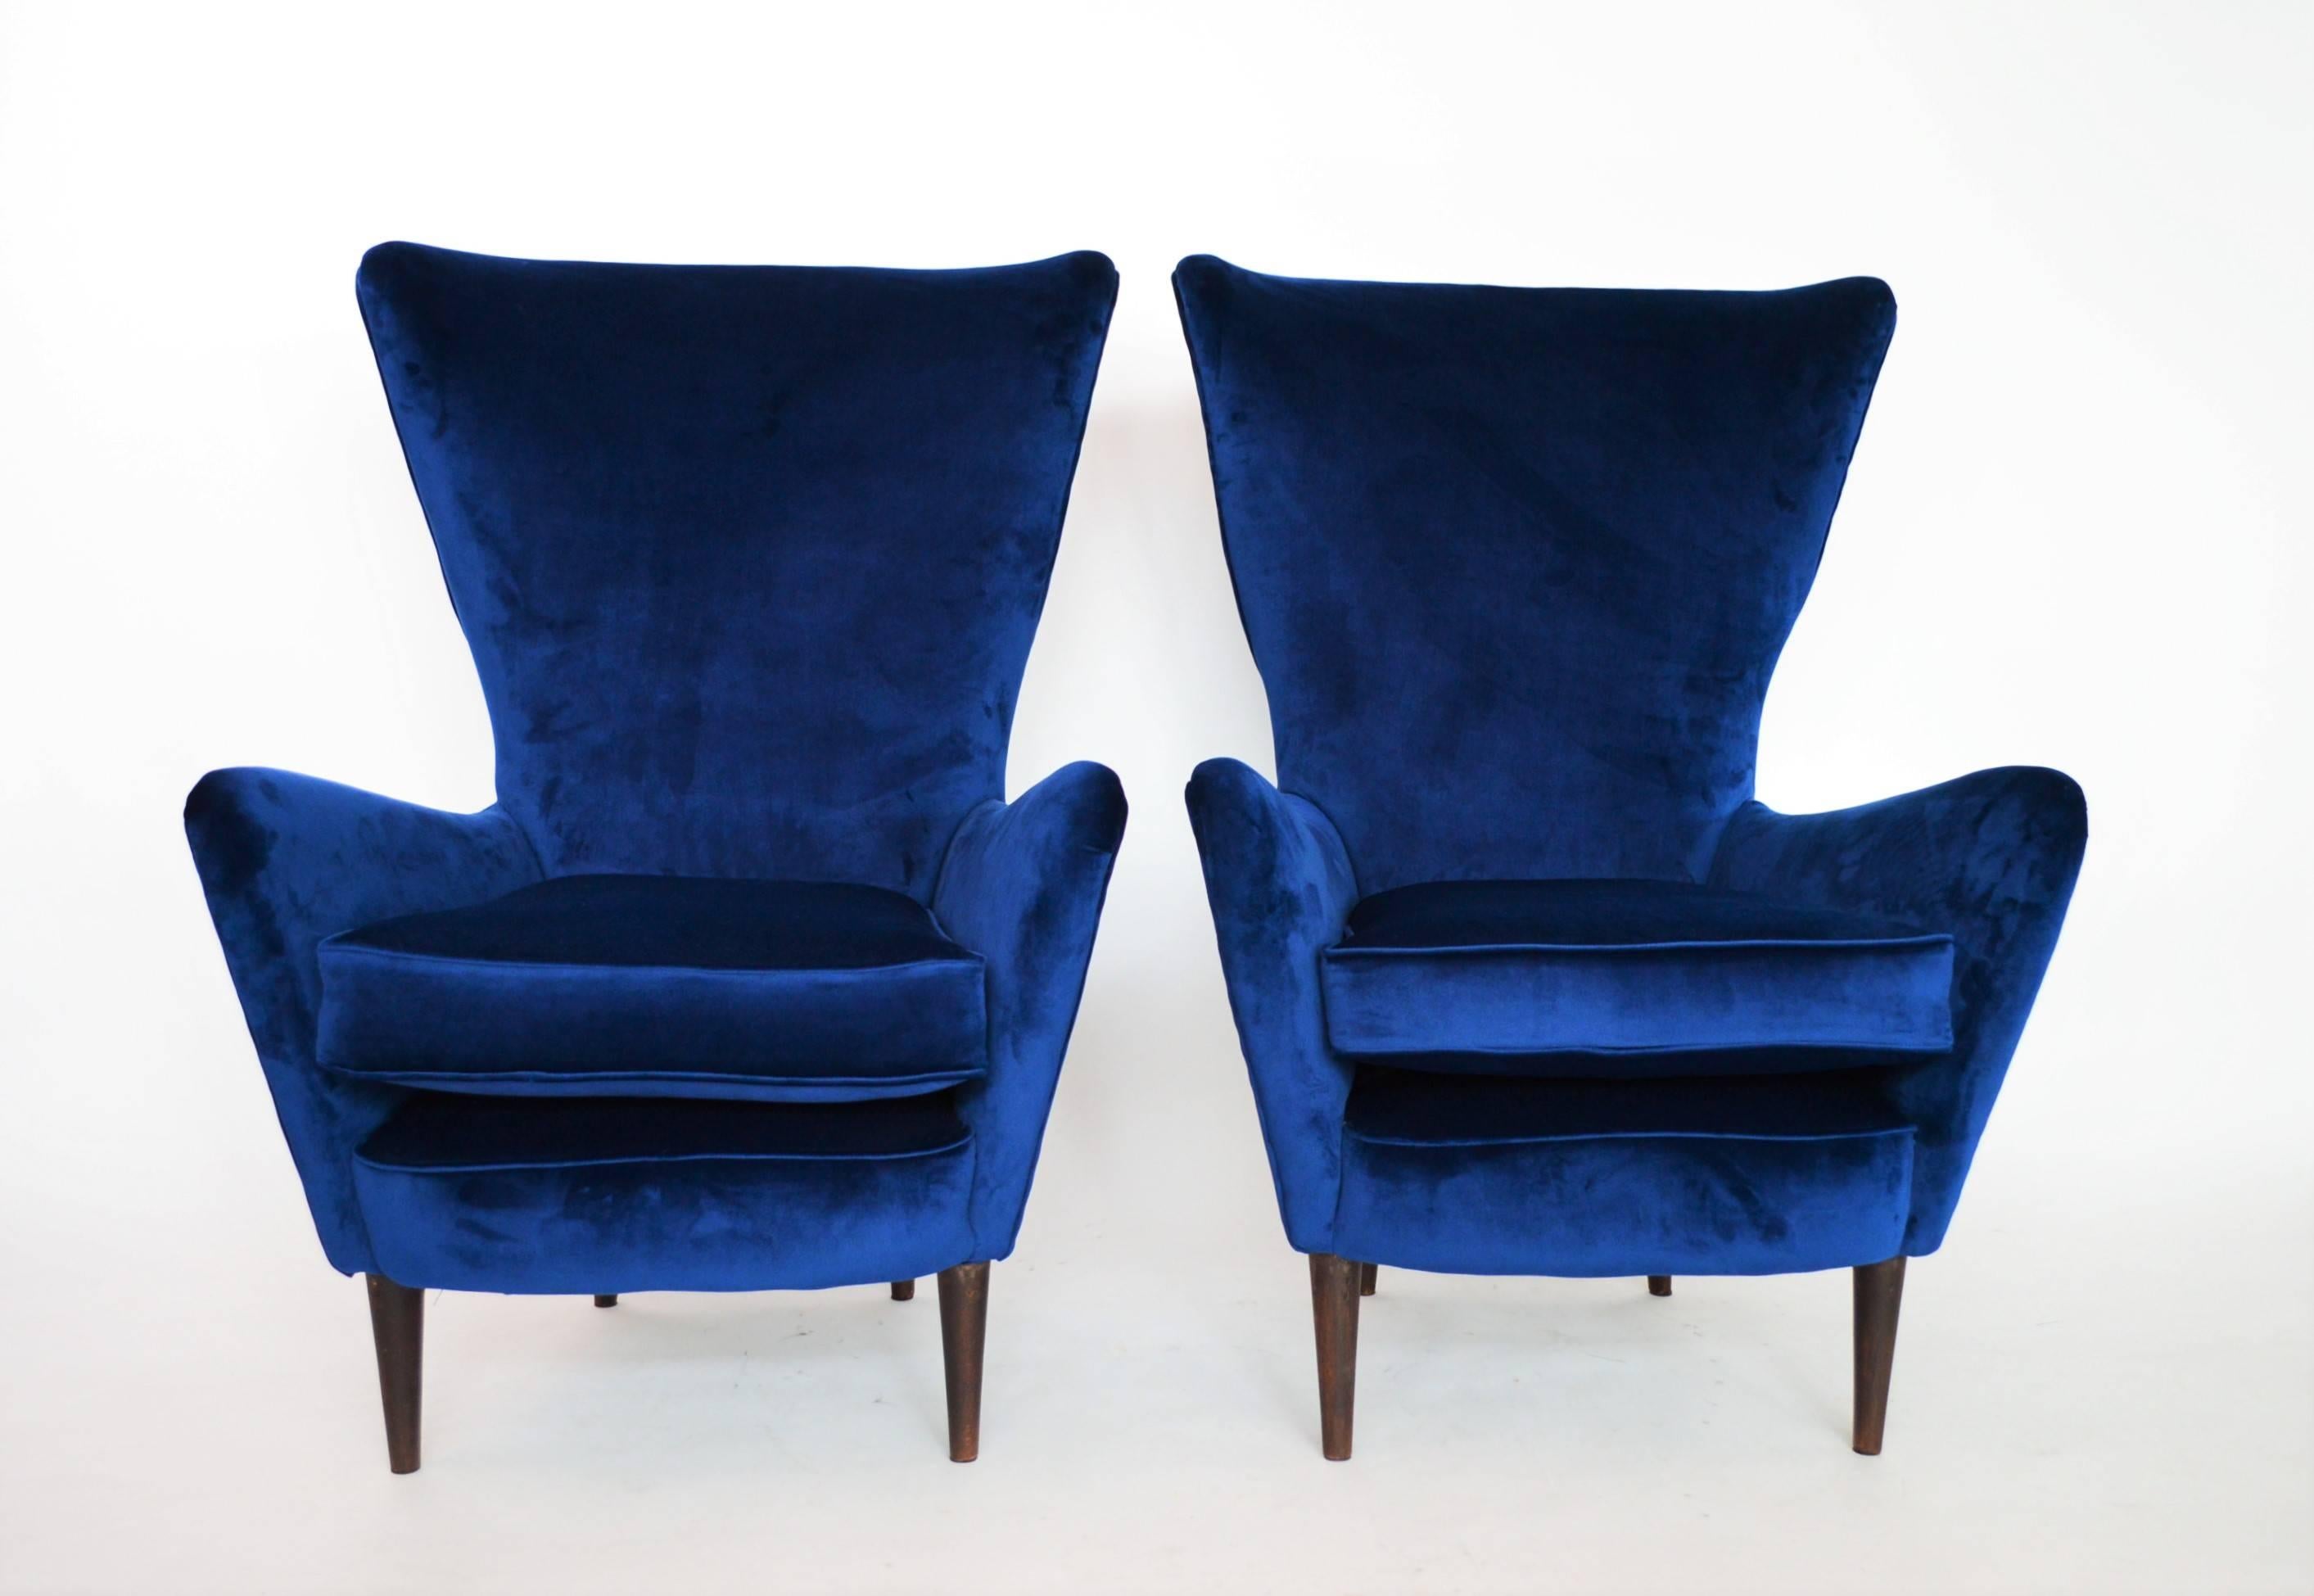 A set of two beautiful and original Italian armchairs or lounge chairs back from the 1950s.
Both chairs have been completely restored and re-upholstered with dark and very soft royal-blue Italian velvet.
Both cushions are new and very soft.
The